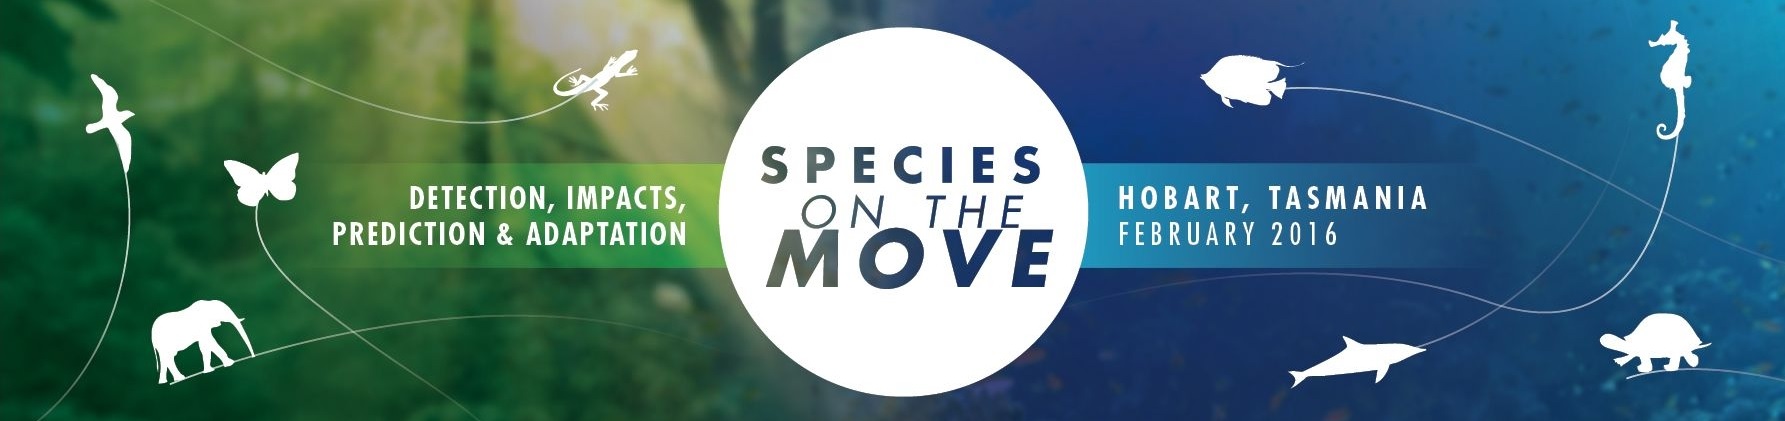 Species on the move conference